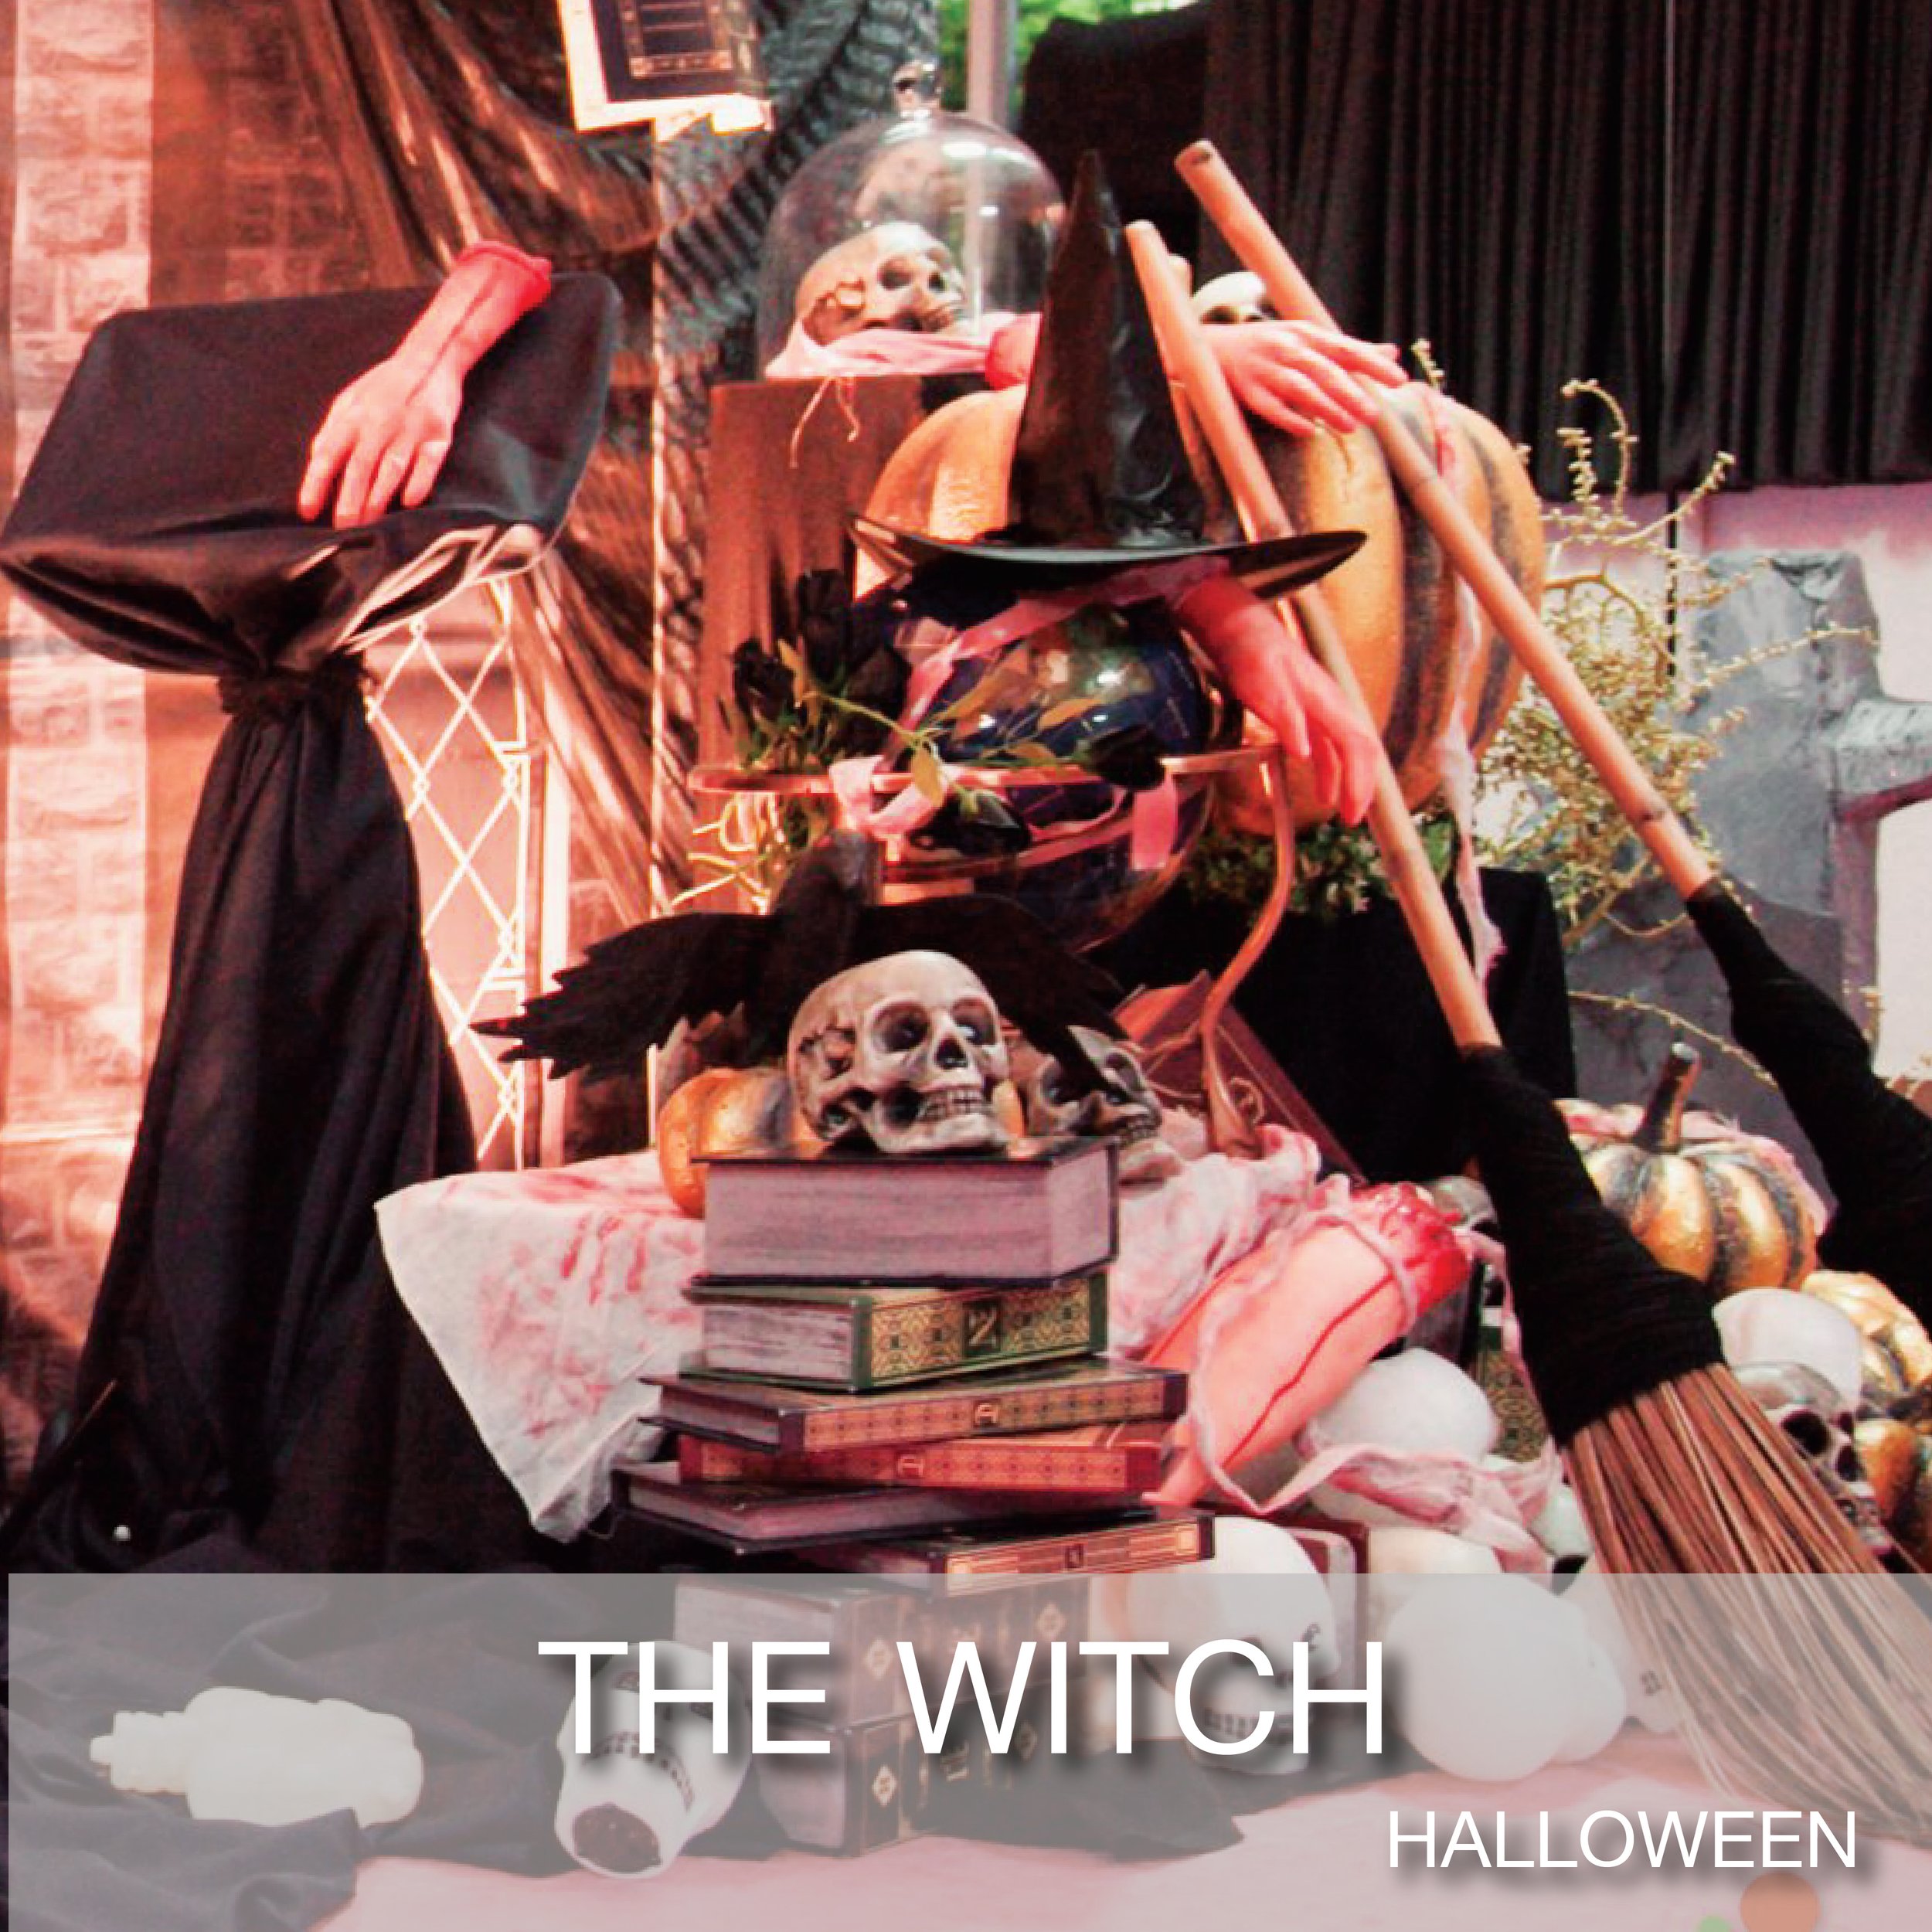 Cover_Popular Theme_Halloween-The Witch-01.jpg